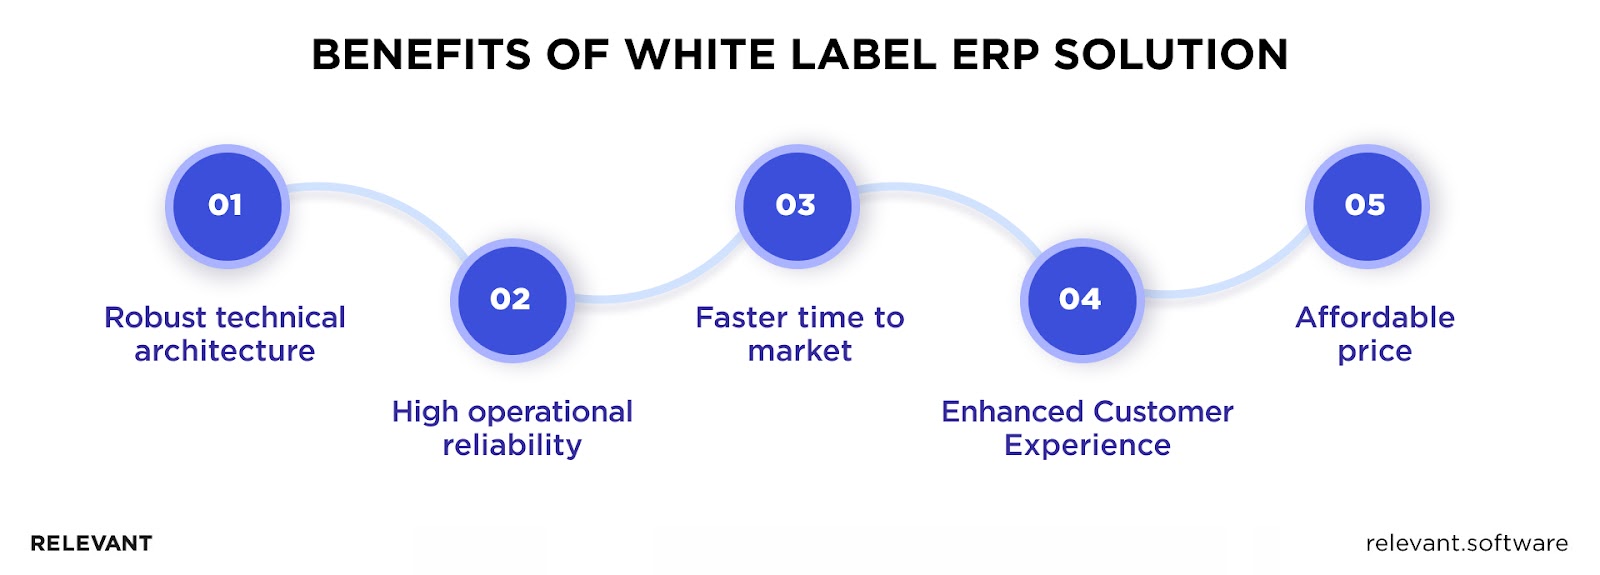 Benefits of white-label ERP solutions